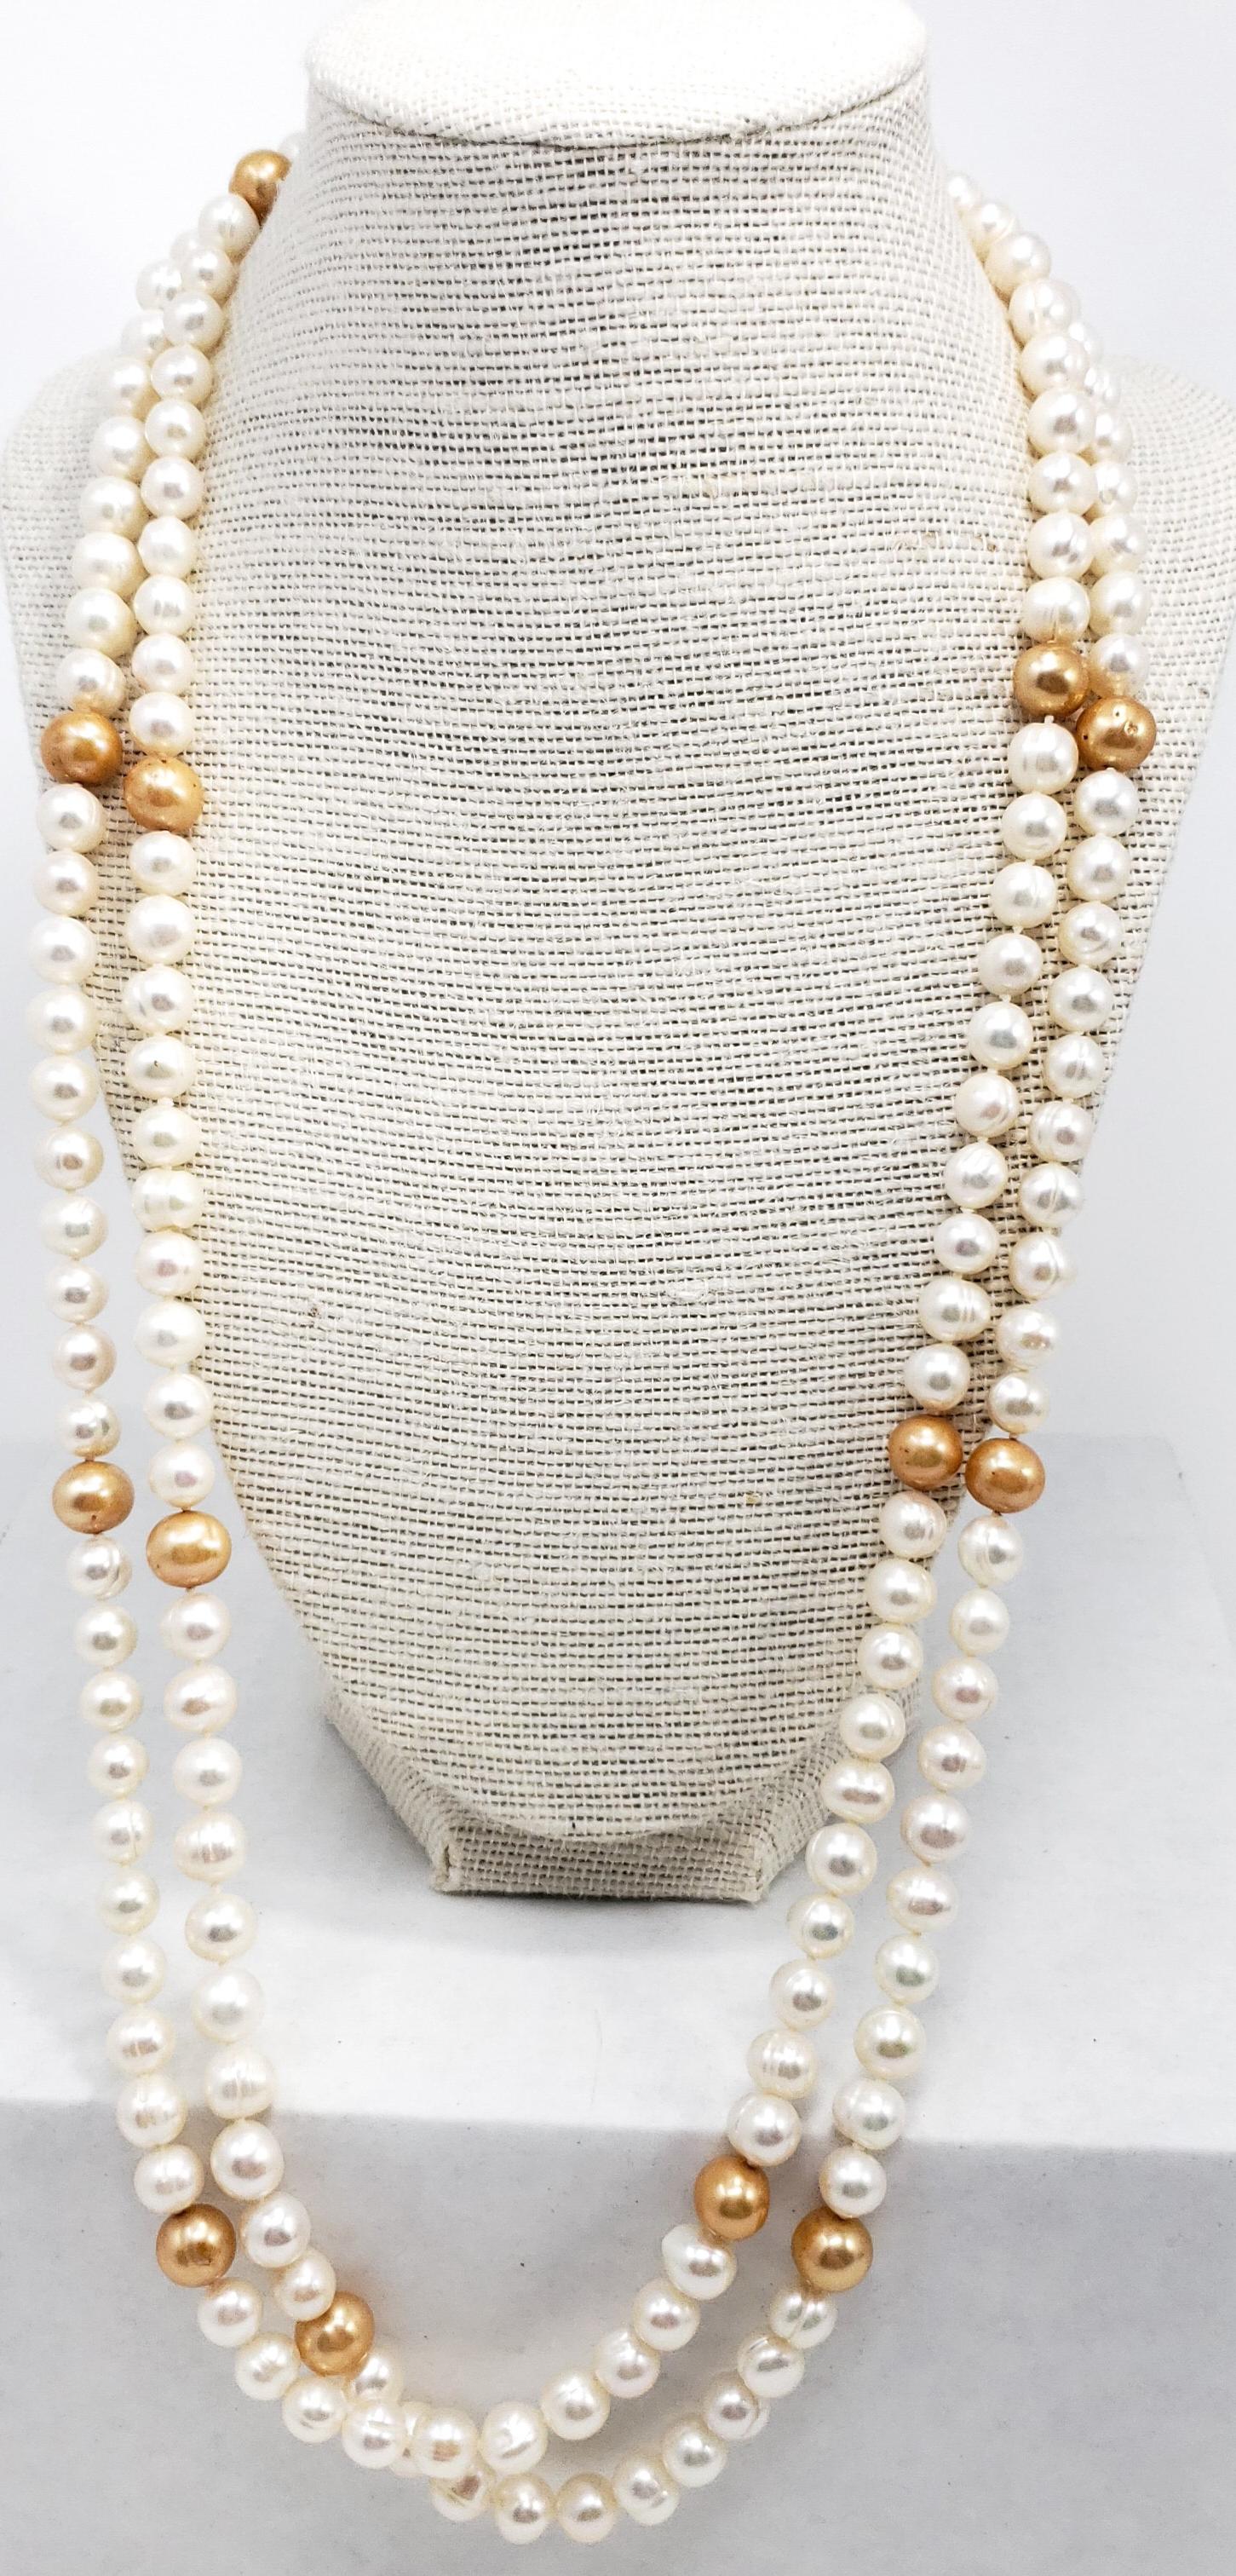 Vintage pearl necklace, featuring a single, 56 inch strand of white and peach pearls. An exquisite accessory!